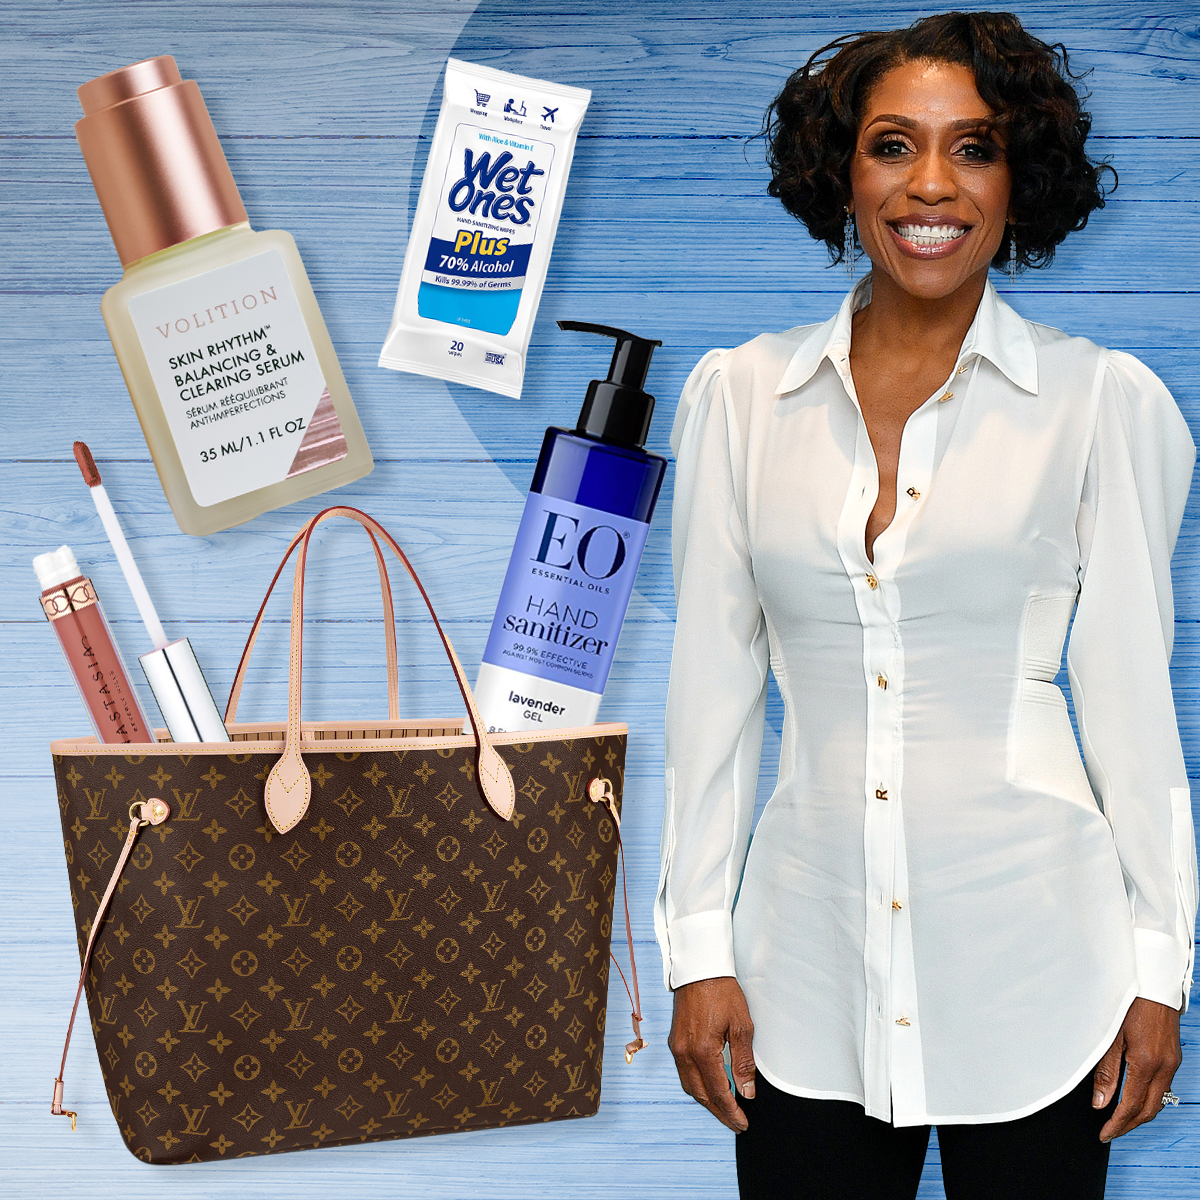 Dr. Jackie Walters Shares What's in Her Bag